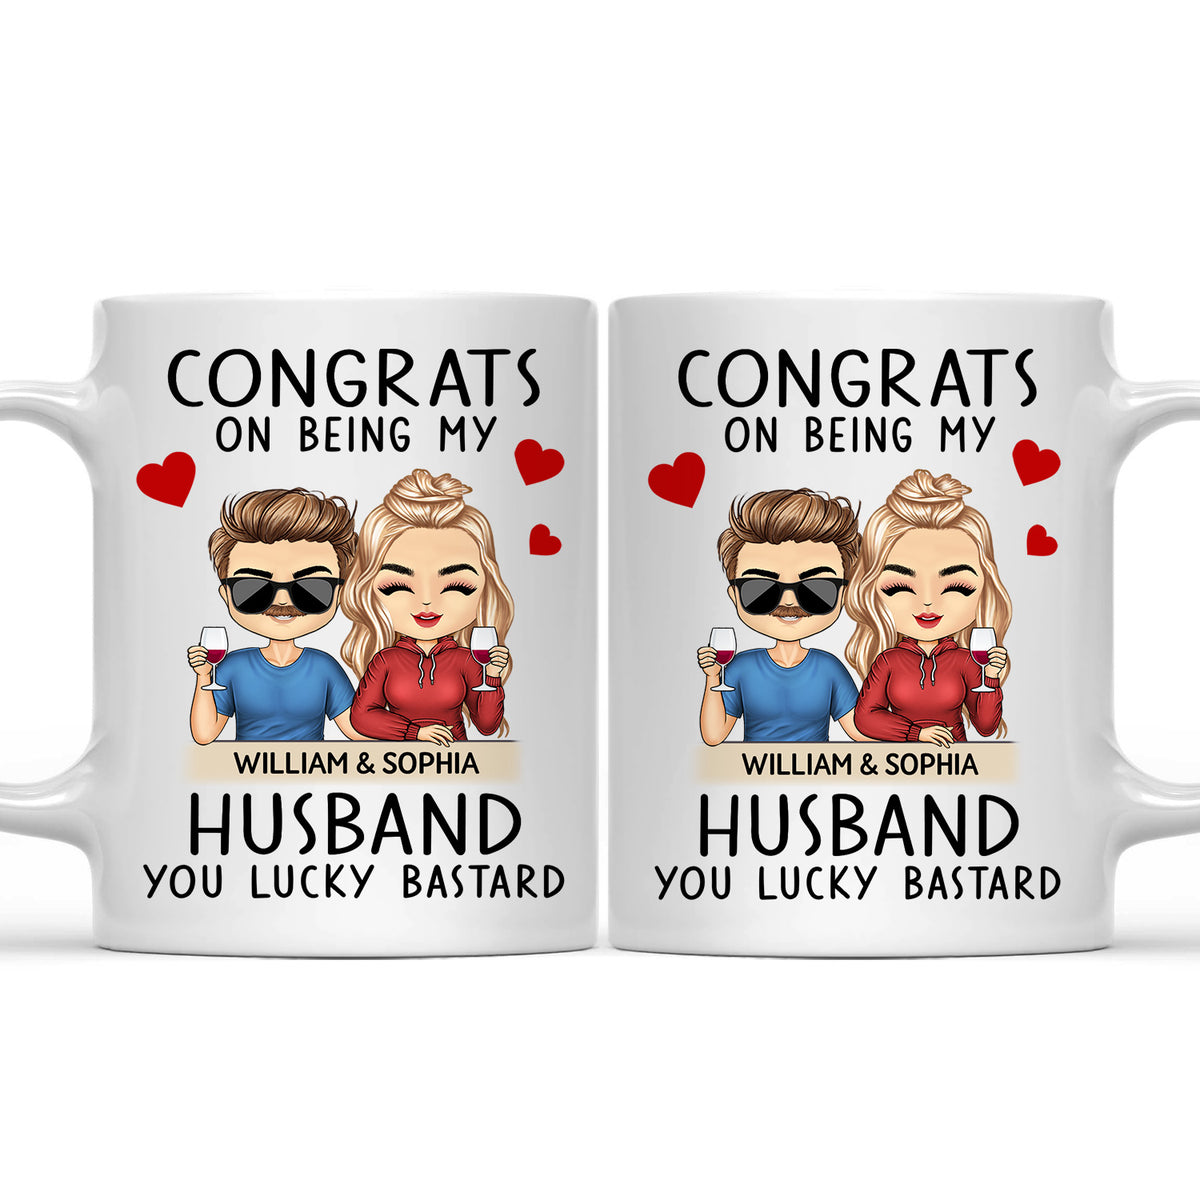 Congrats On Being My Boyfriend, You Lucky Bastard - Personalized Gifts  Custom Tumbler For Couples For Him/Her, Valentine's Day Gift